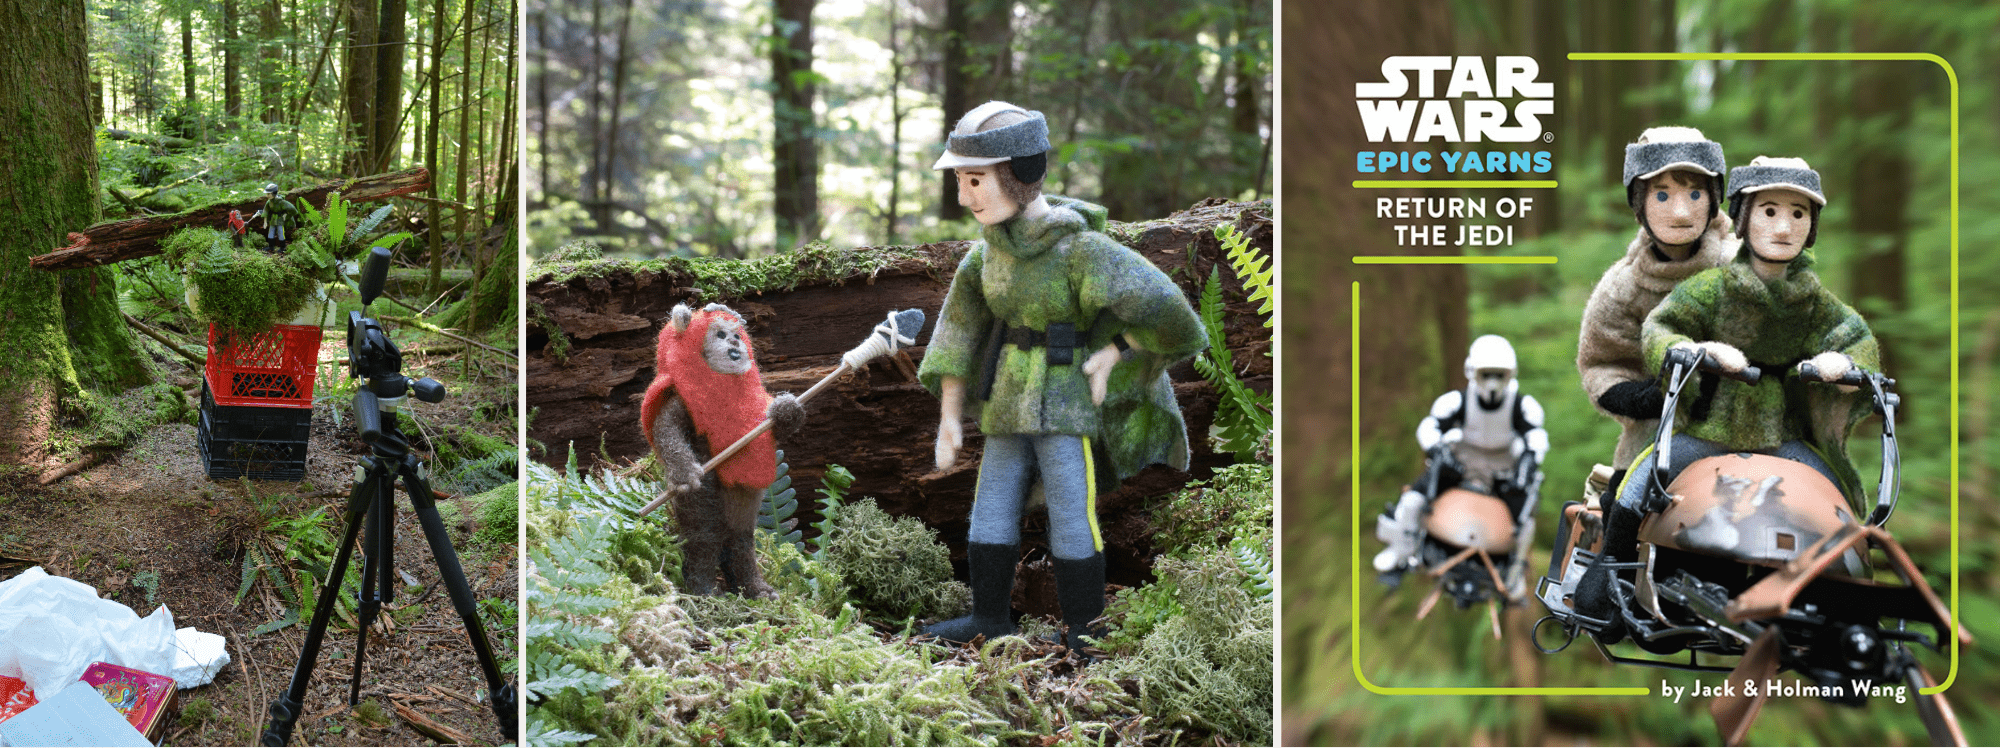 Image description: three images depicting needle-felted scenes in miniature. On the left, the setup in forest. In the centre, the professional photo for publication. On the right, a similar image on a book cover.